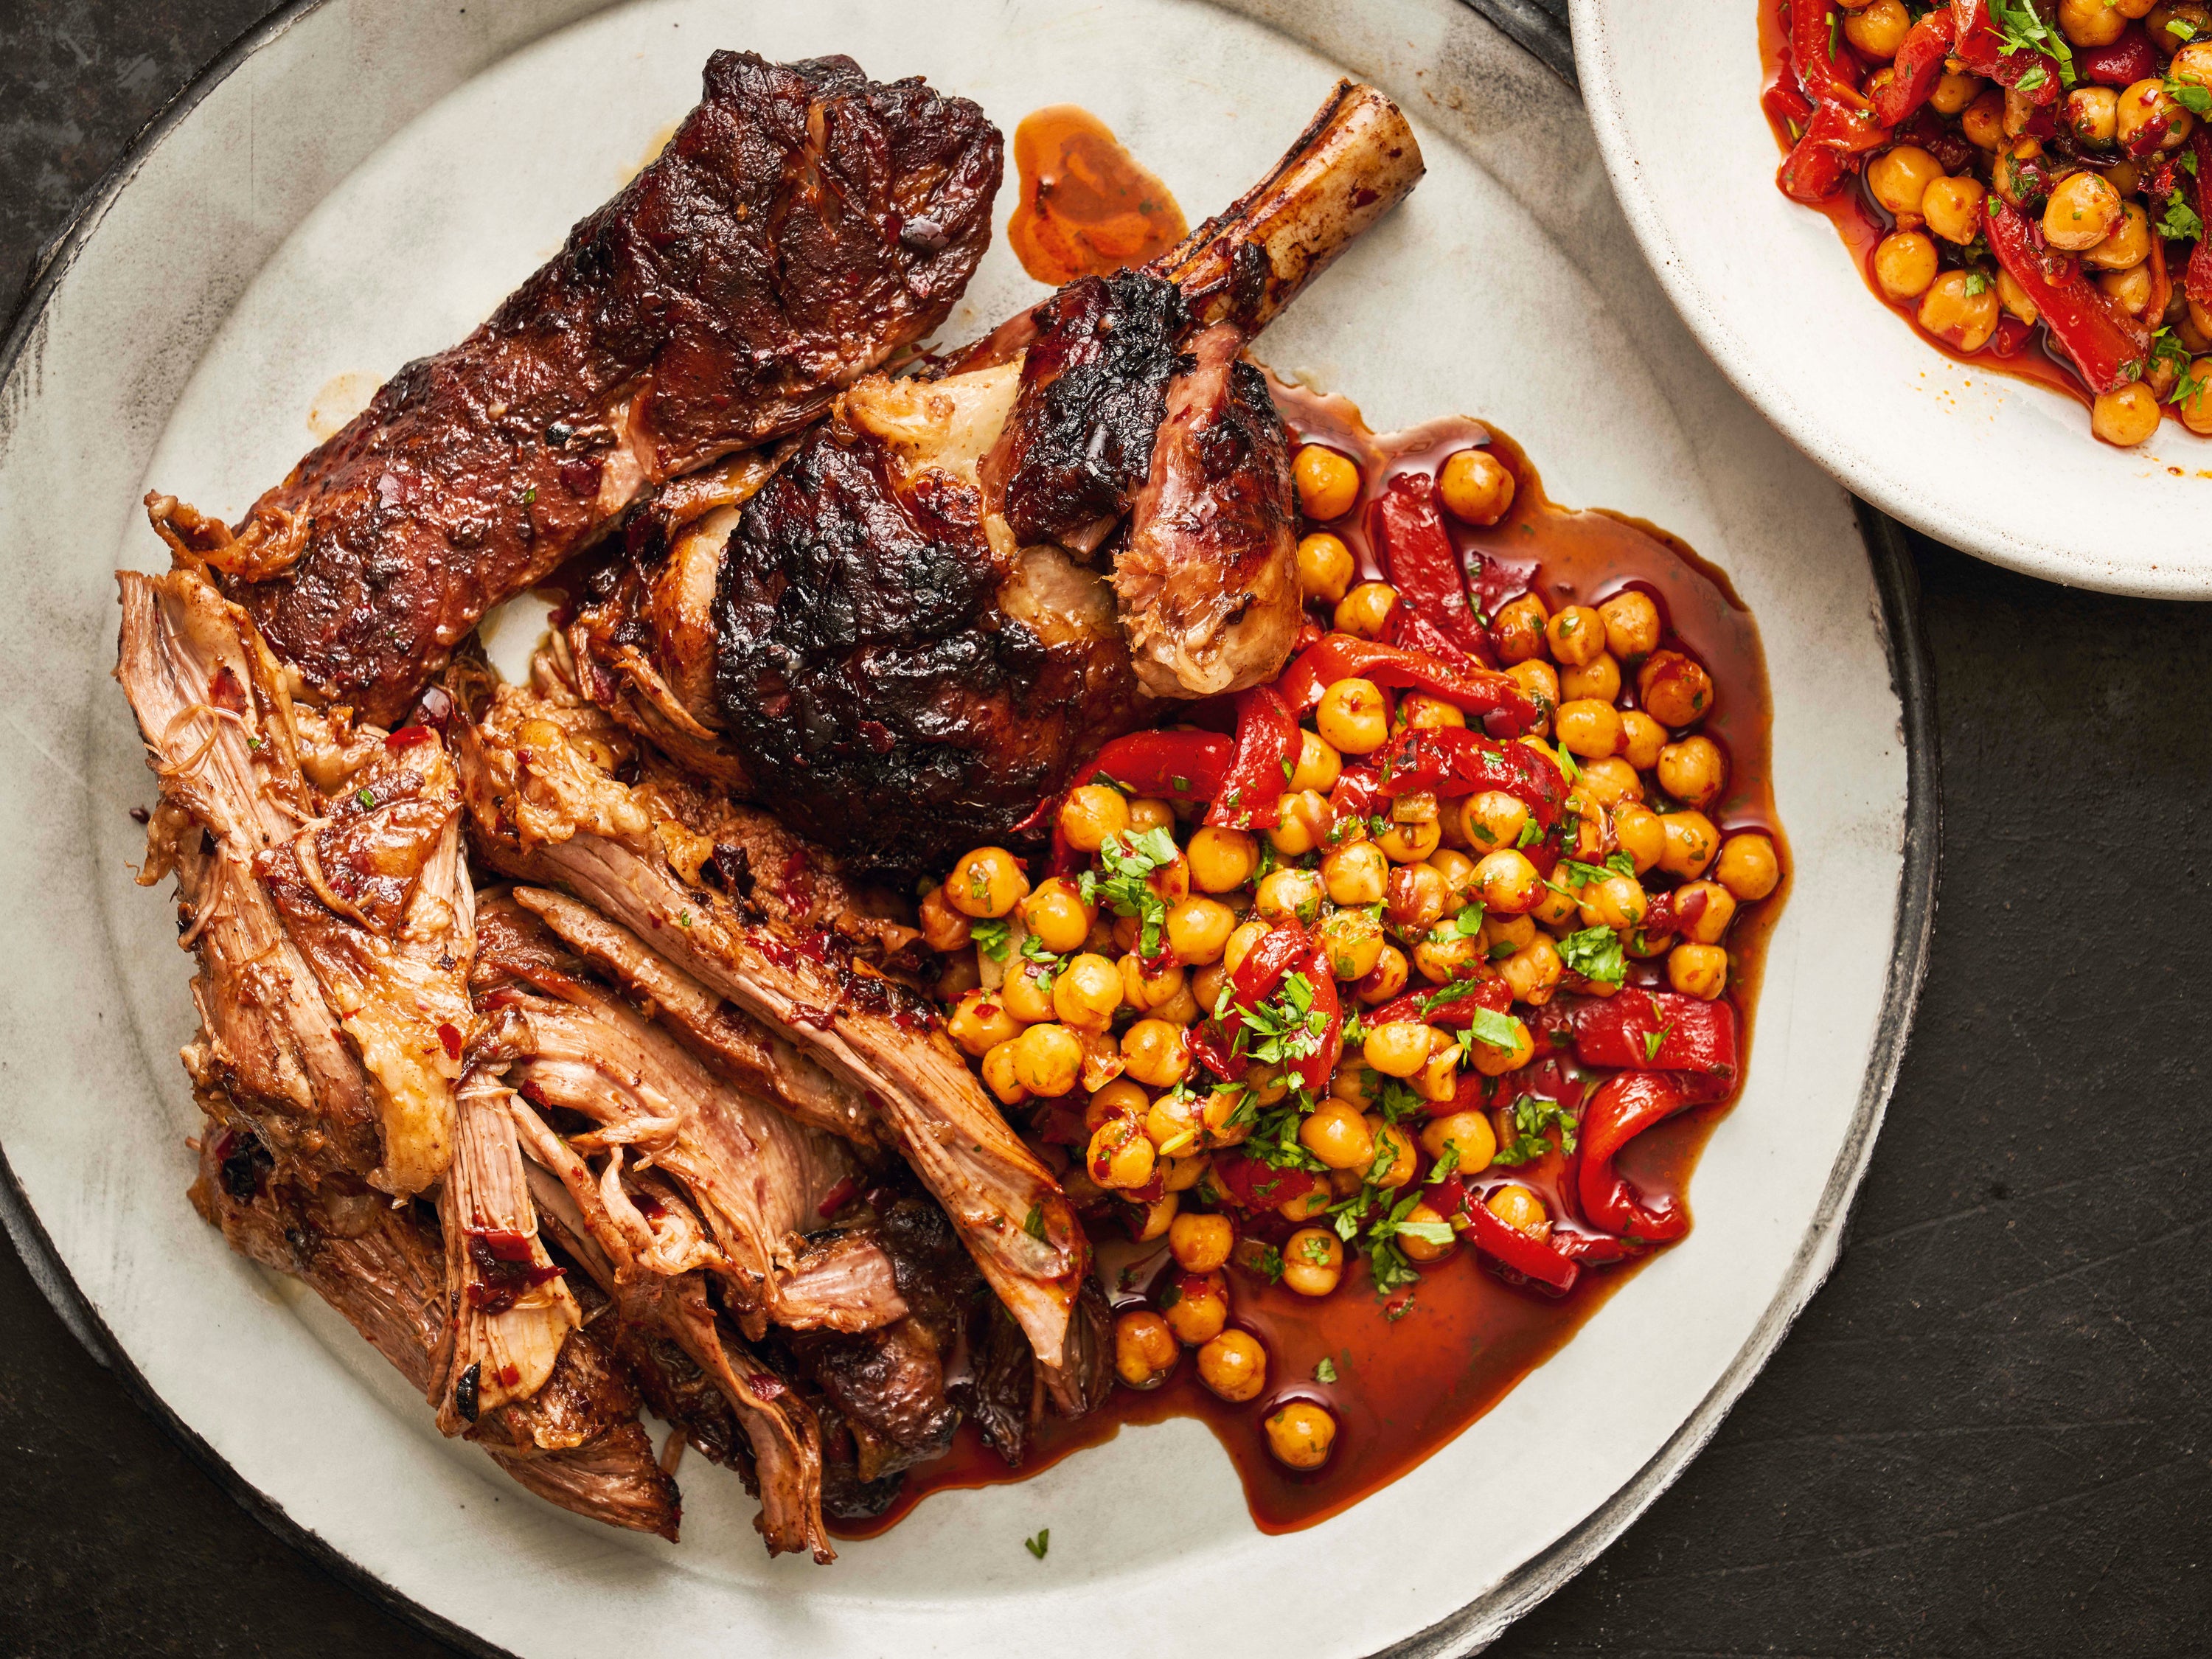 When it comes to slow cooking lamb, says Blanc, the shoulder is the best cut